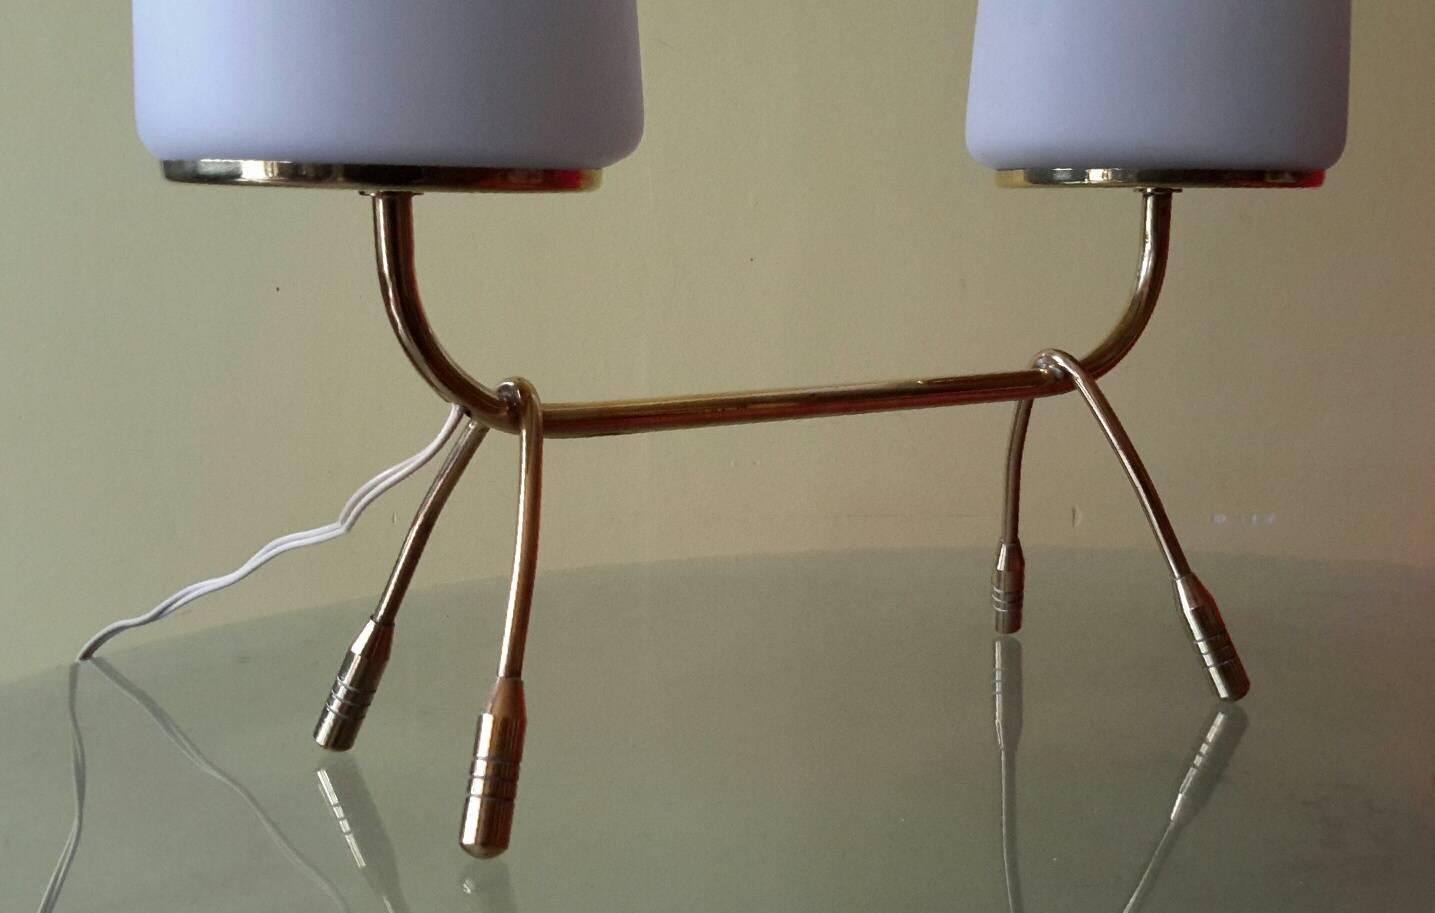 Beautiful brass Minimalist structure table lamp with large opaline diffuser, France, 1950s
The lamp is in excellent condition with two large diffusers in mat white opaline.
The wiring fit to US standards.

Dimensions:
Height with opaline 43 cm,